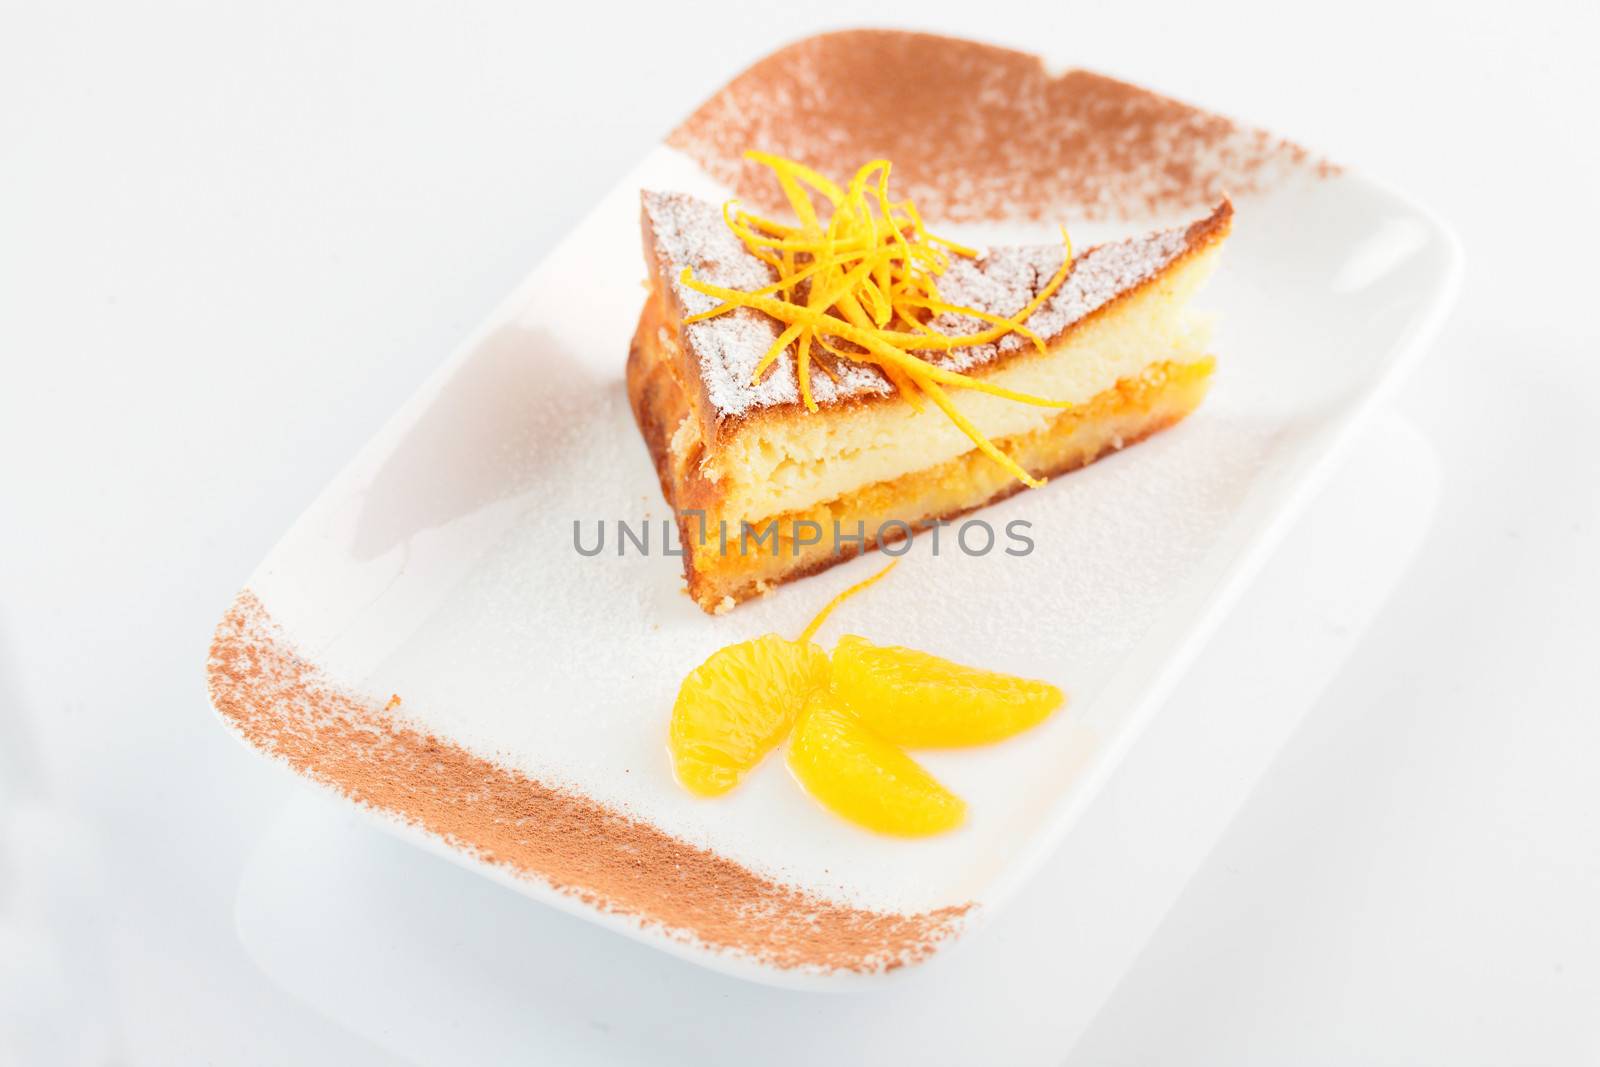 tasty cake on the dish by fiphoto